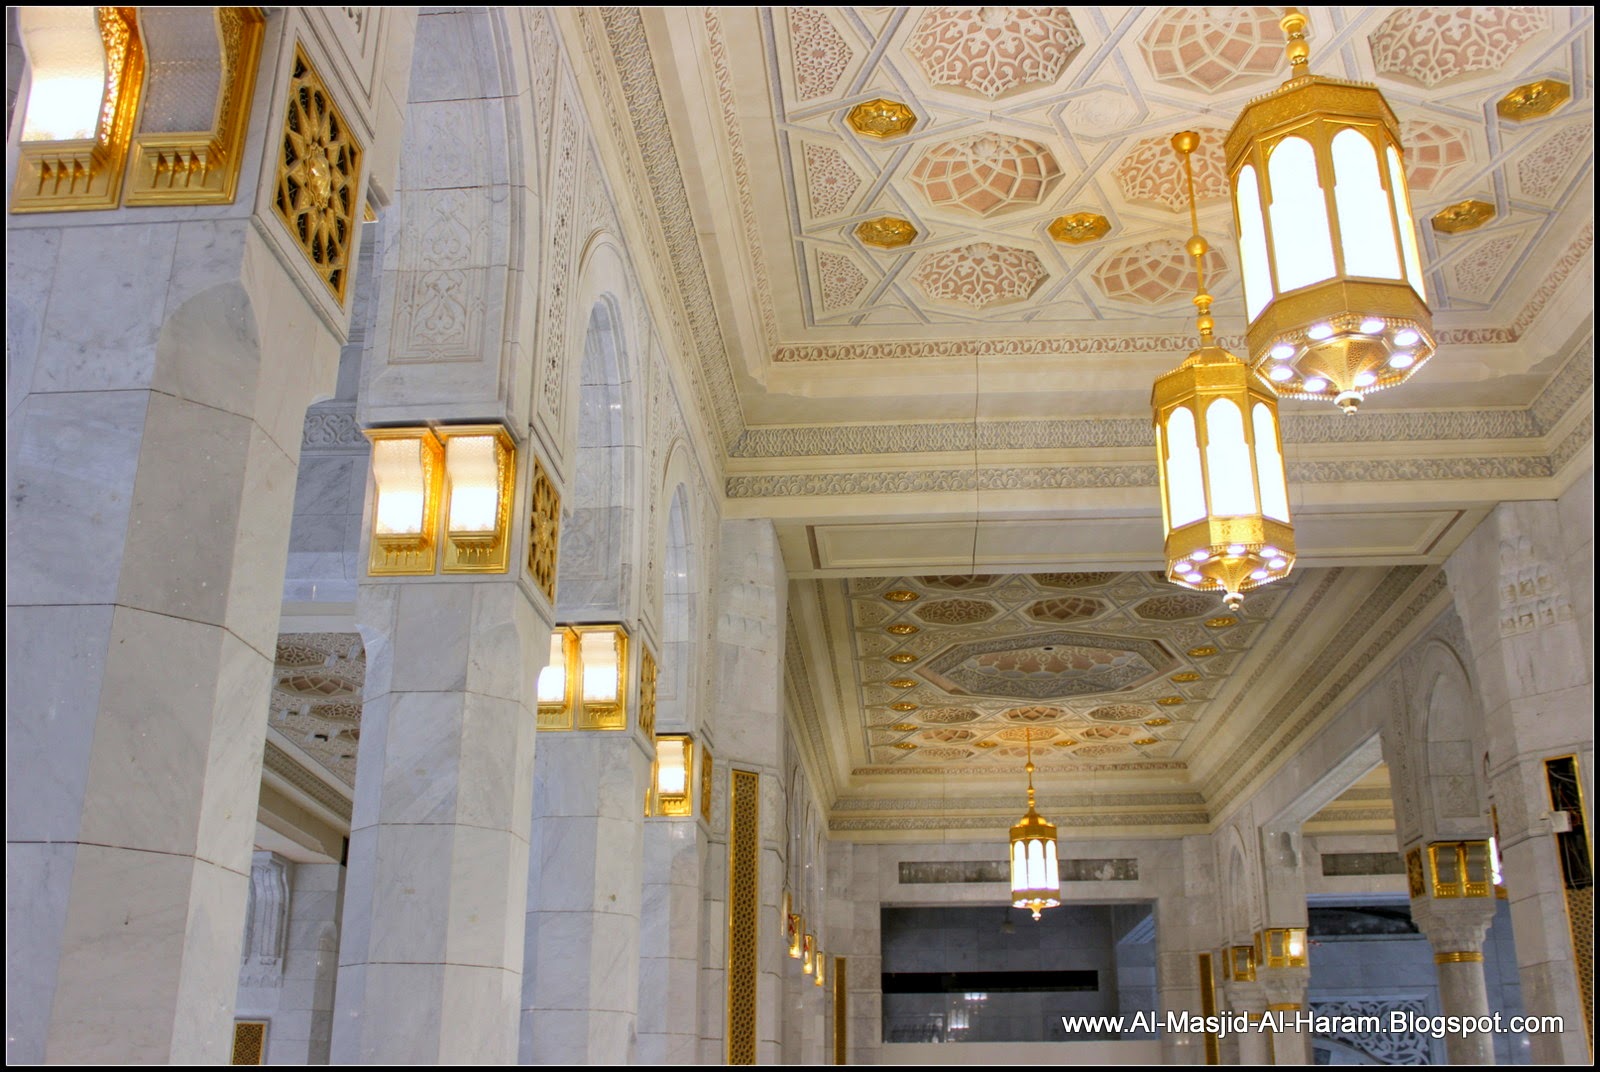 Pictures of Al Masjid Al Haram: New Expansion Project of Masjid Al